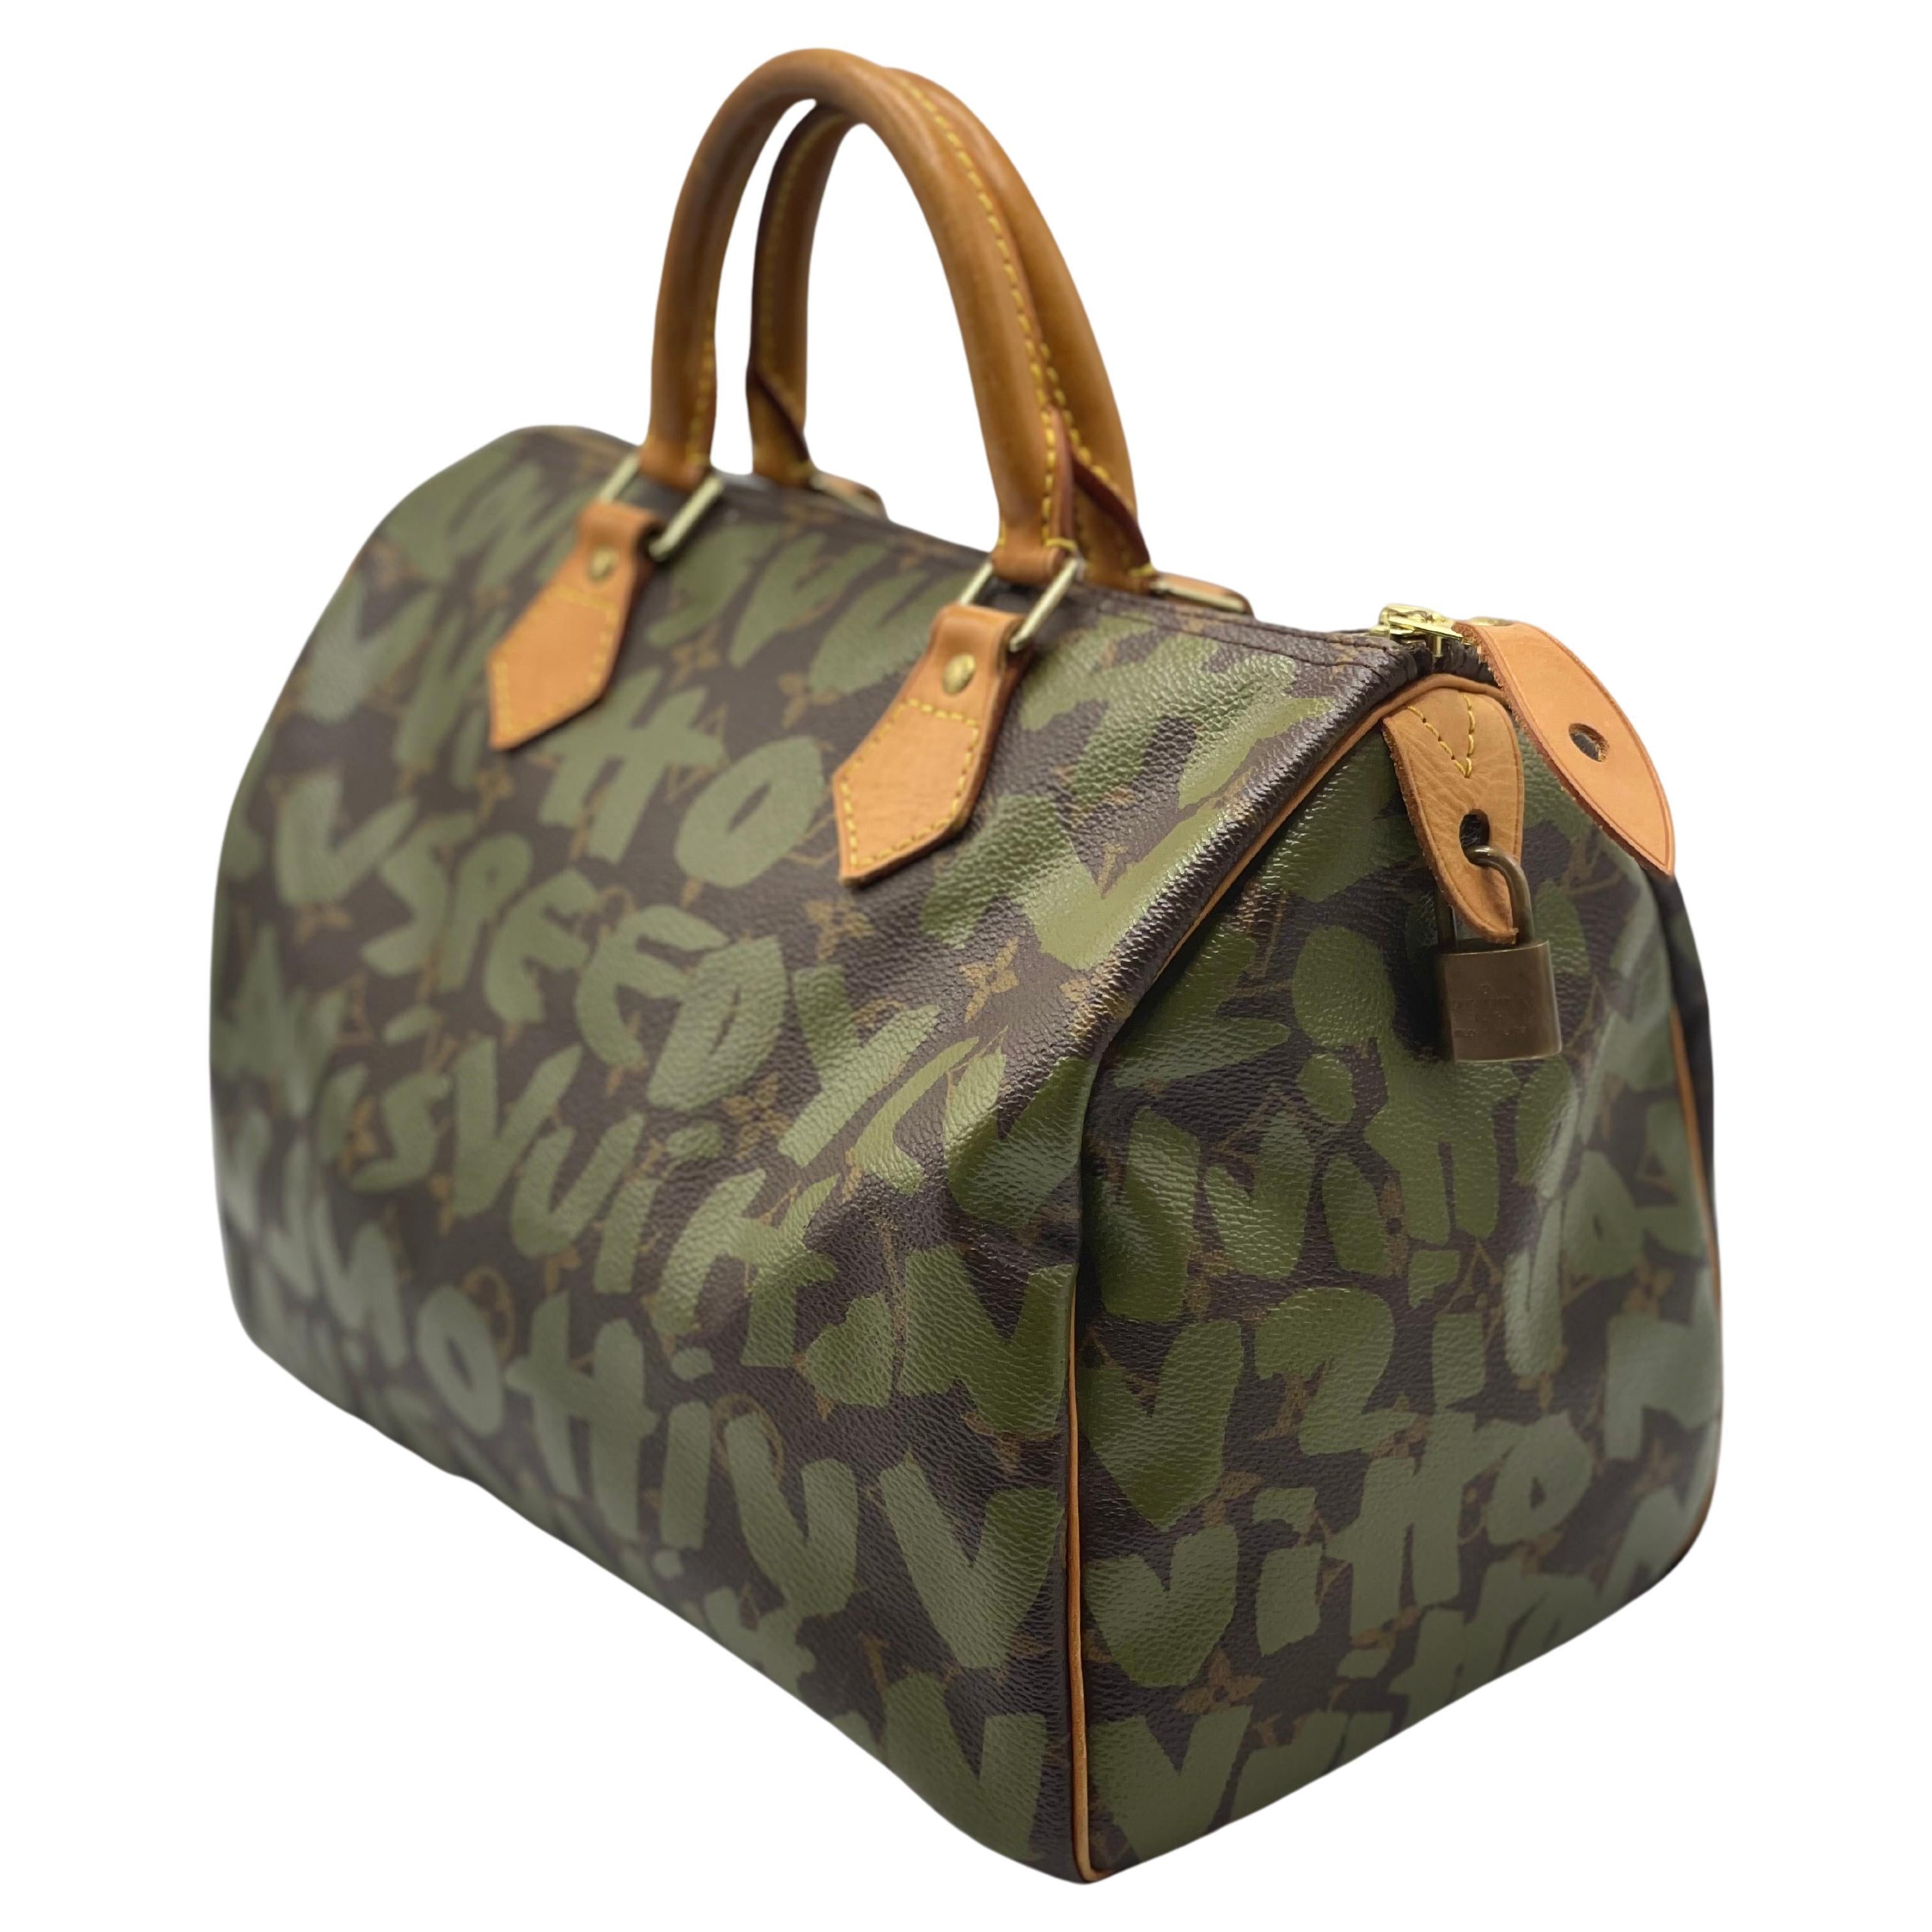 Black Limited Edition Louis Vuitton x Stephen Sprouse Green Graffiti Speedy  For Sale